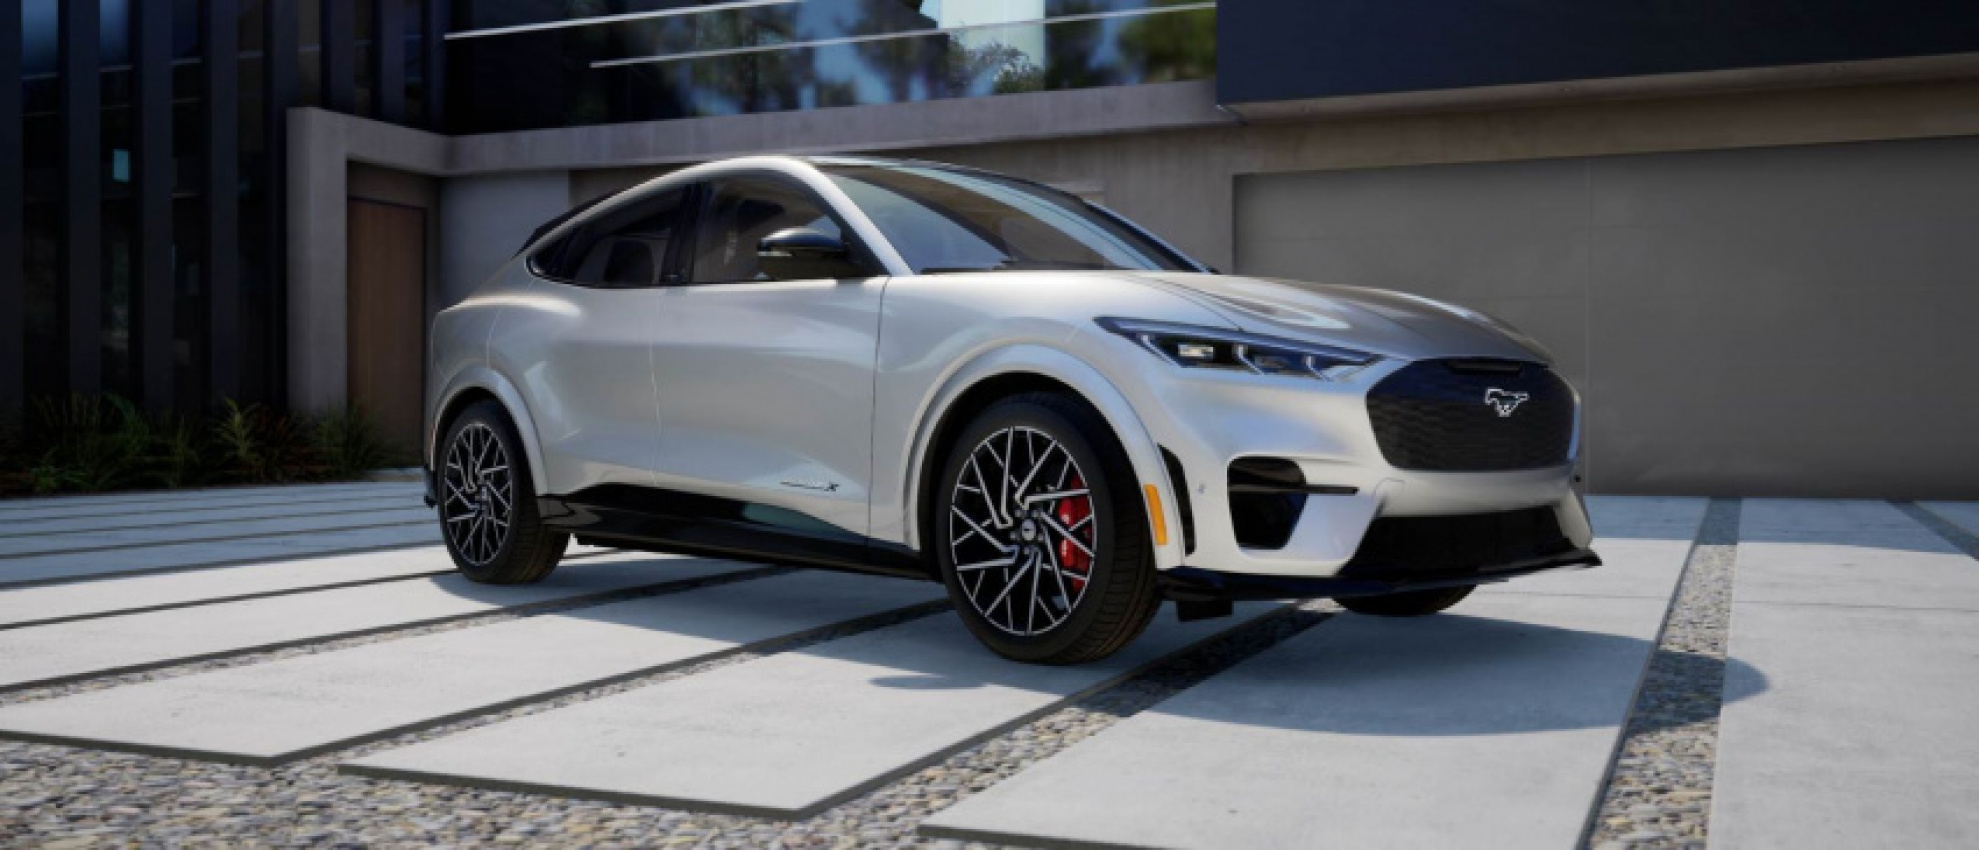 autos, cars, ford, kia, consumer reports, ford mustang, kia niro, mach-e, niro, how did the performance-focused ford mustang mach-e get a worse road test score than the kia niro ev on consumer reports?